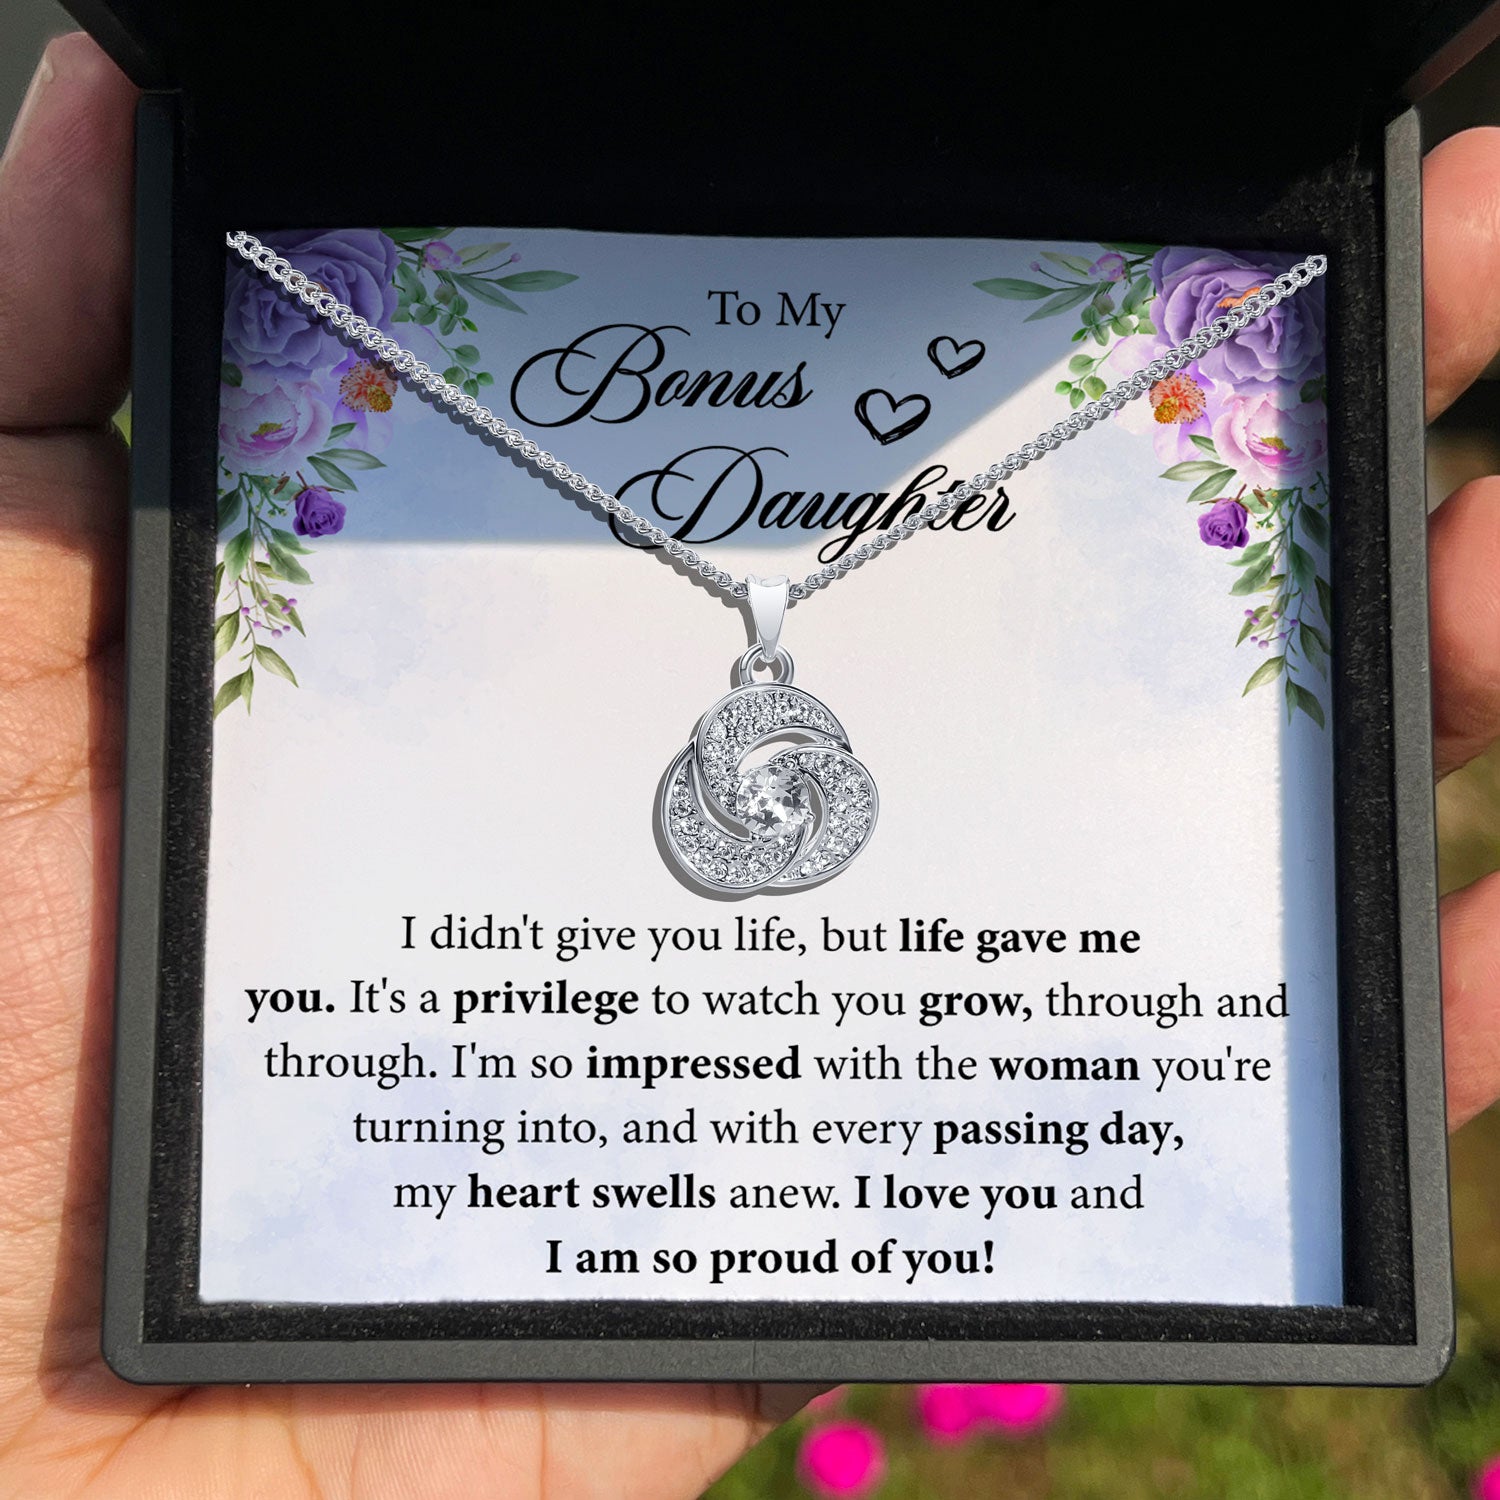 To My Bonus Daughter - I am So Proud of You - Tryndi Love Knot Necklace